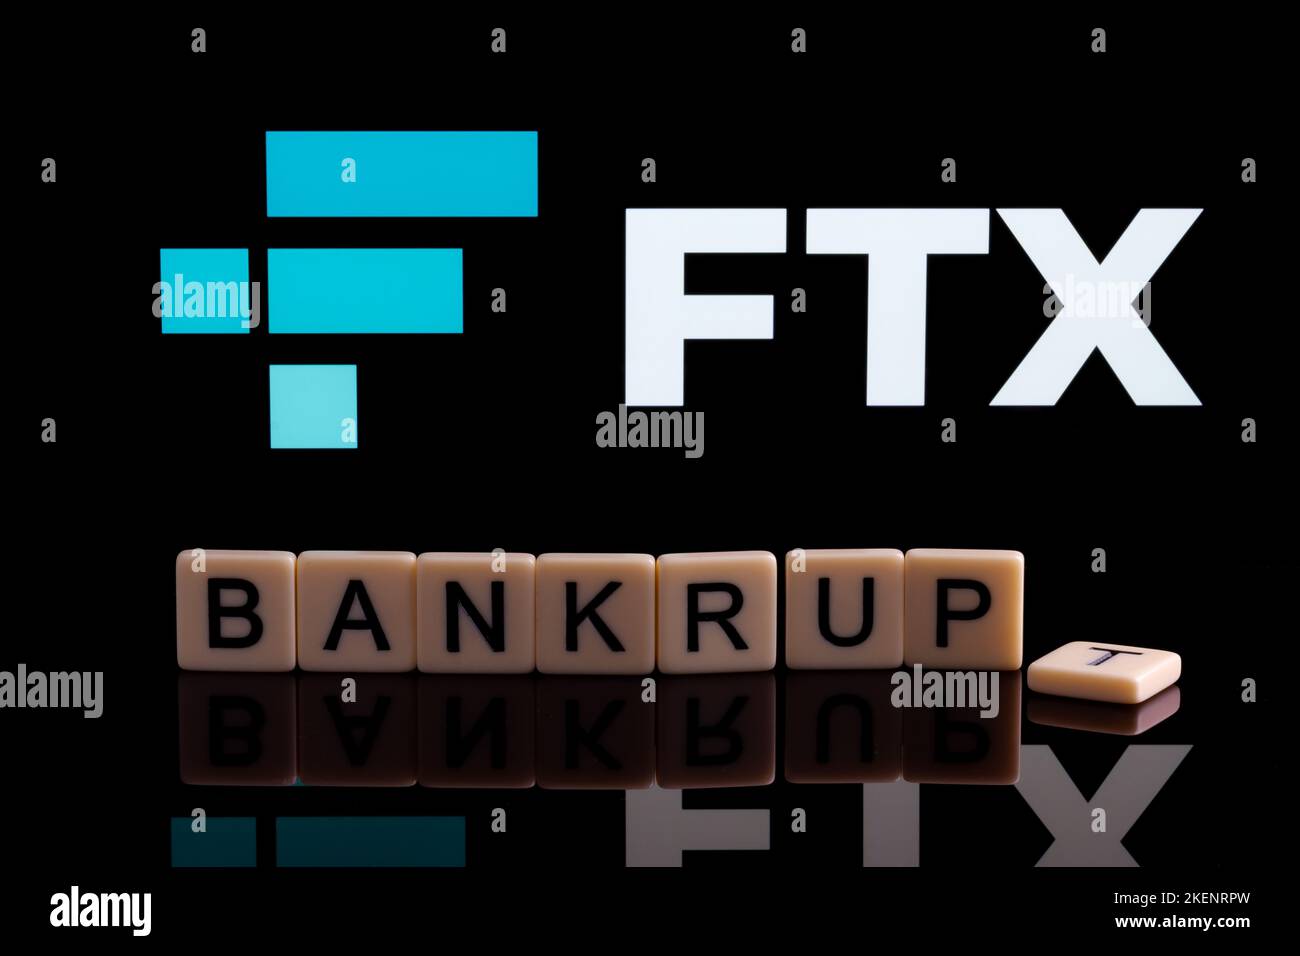 BANKRUPT word made of letters seen in front and blurred FTX Cryptocurrency Exchange company logo seen on display. Concept. Stafford, United Kindom, No Stock Photo